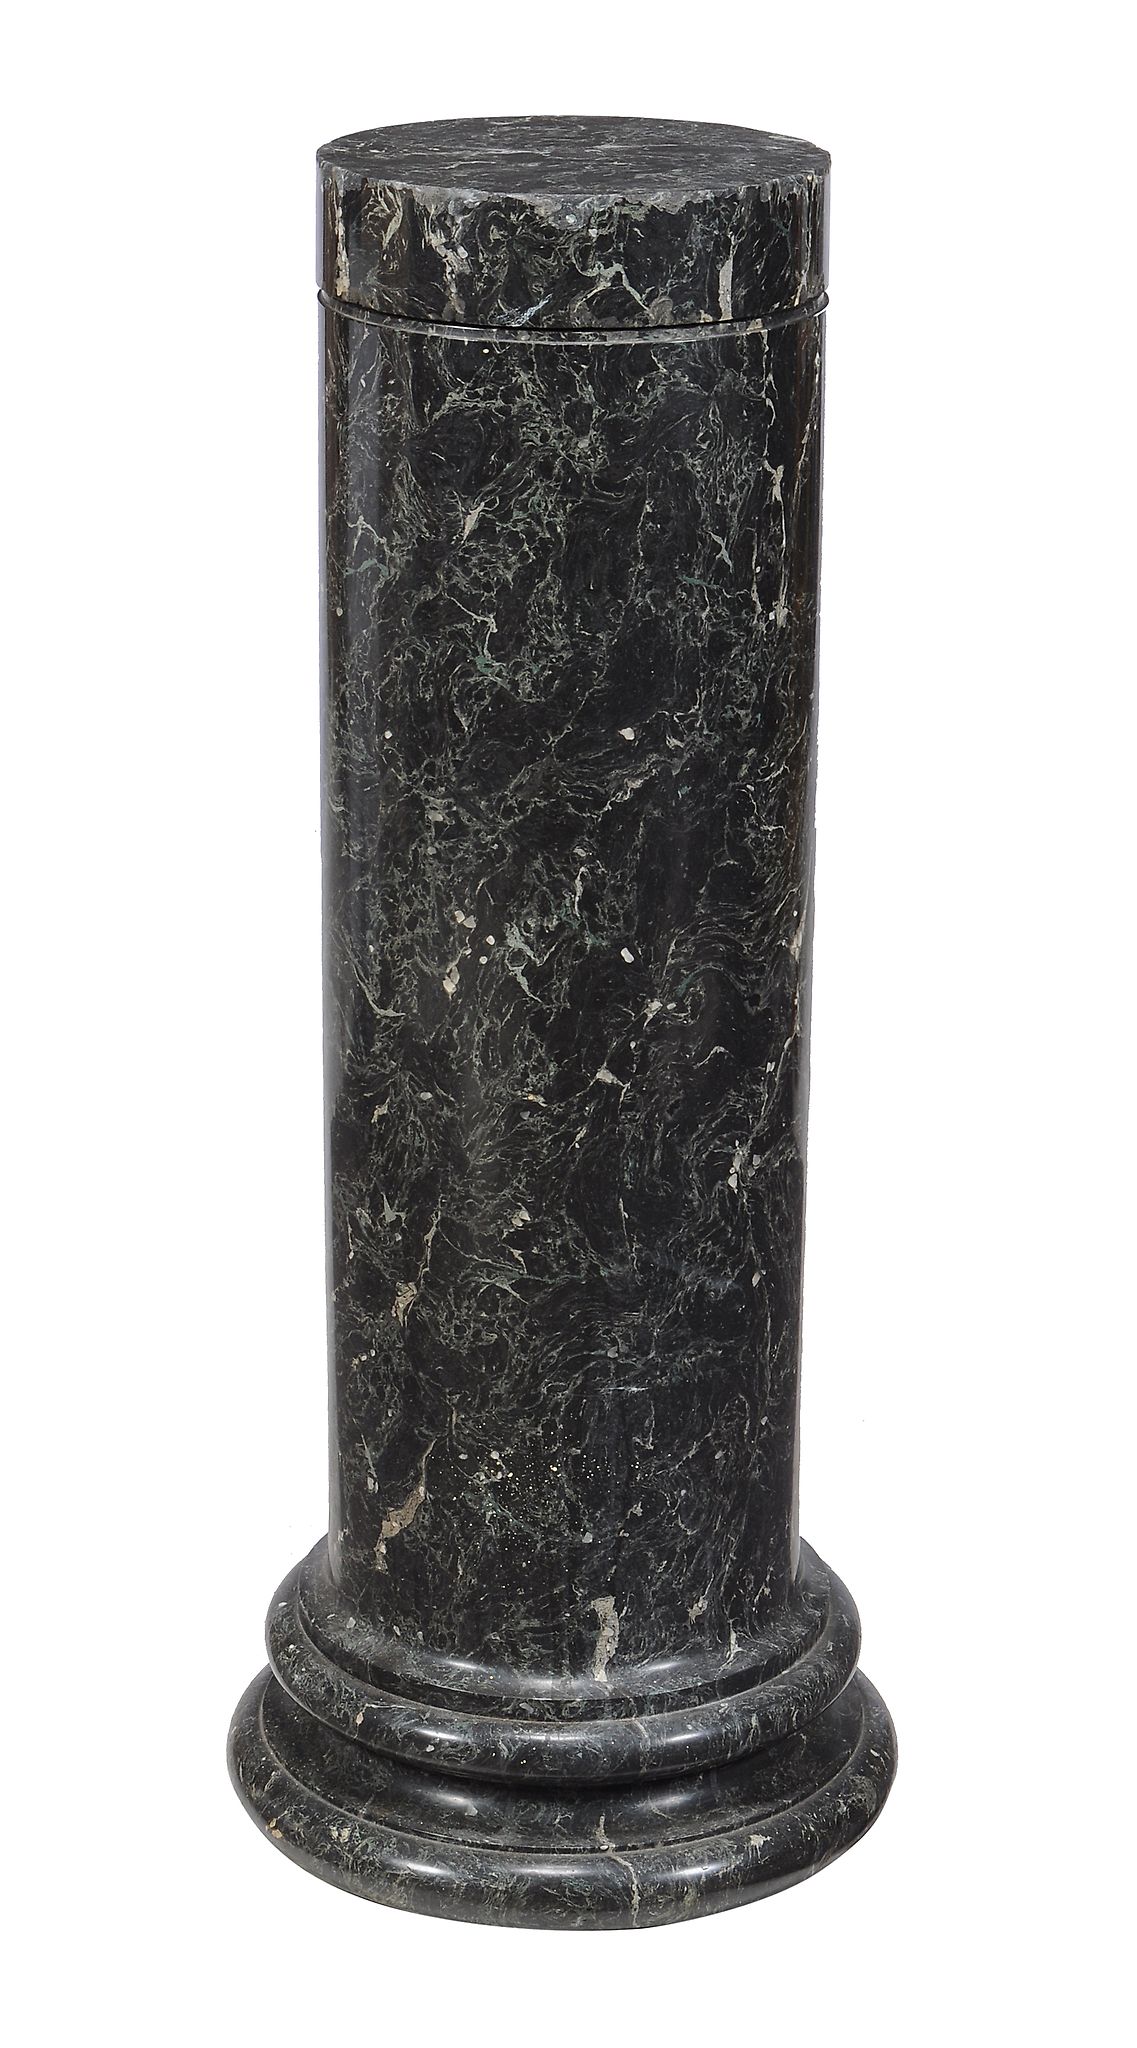 A faux green serpentine marble scagliola pedestal, early 20th century, with revolving top and